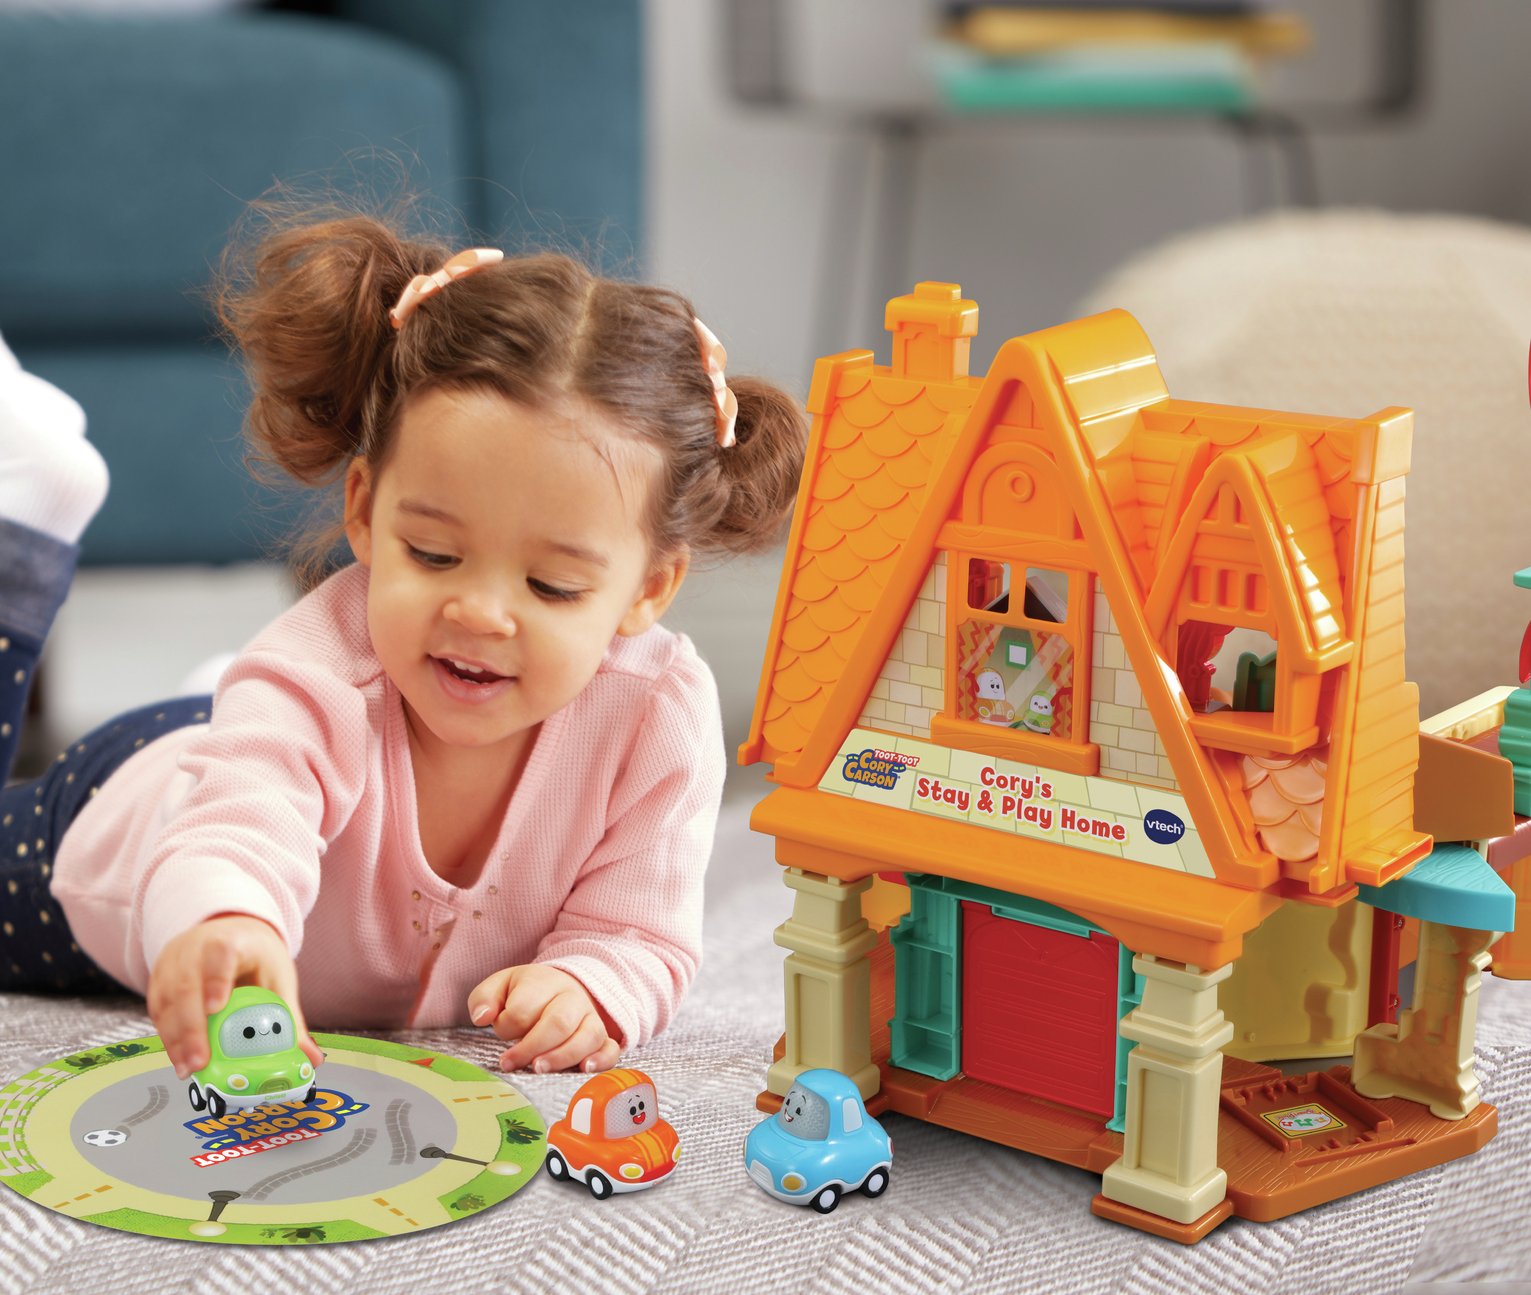 VTech Toot-Toot Cory Carson Cory's Stay & Play Playset Review